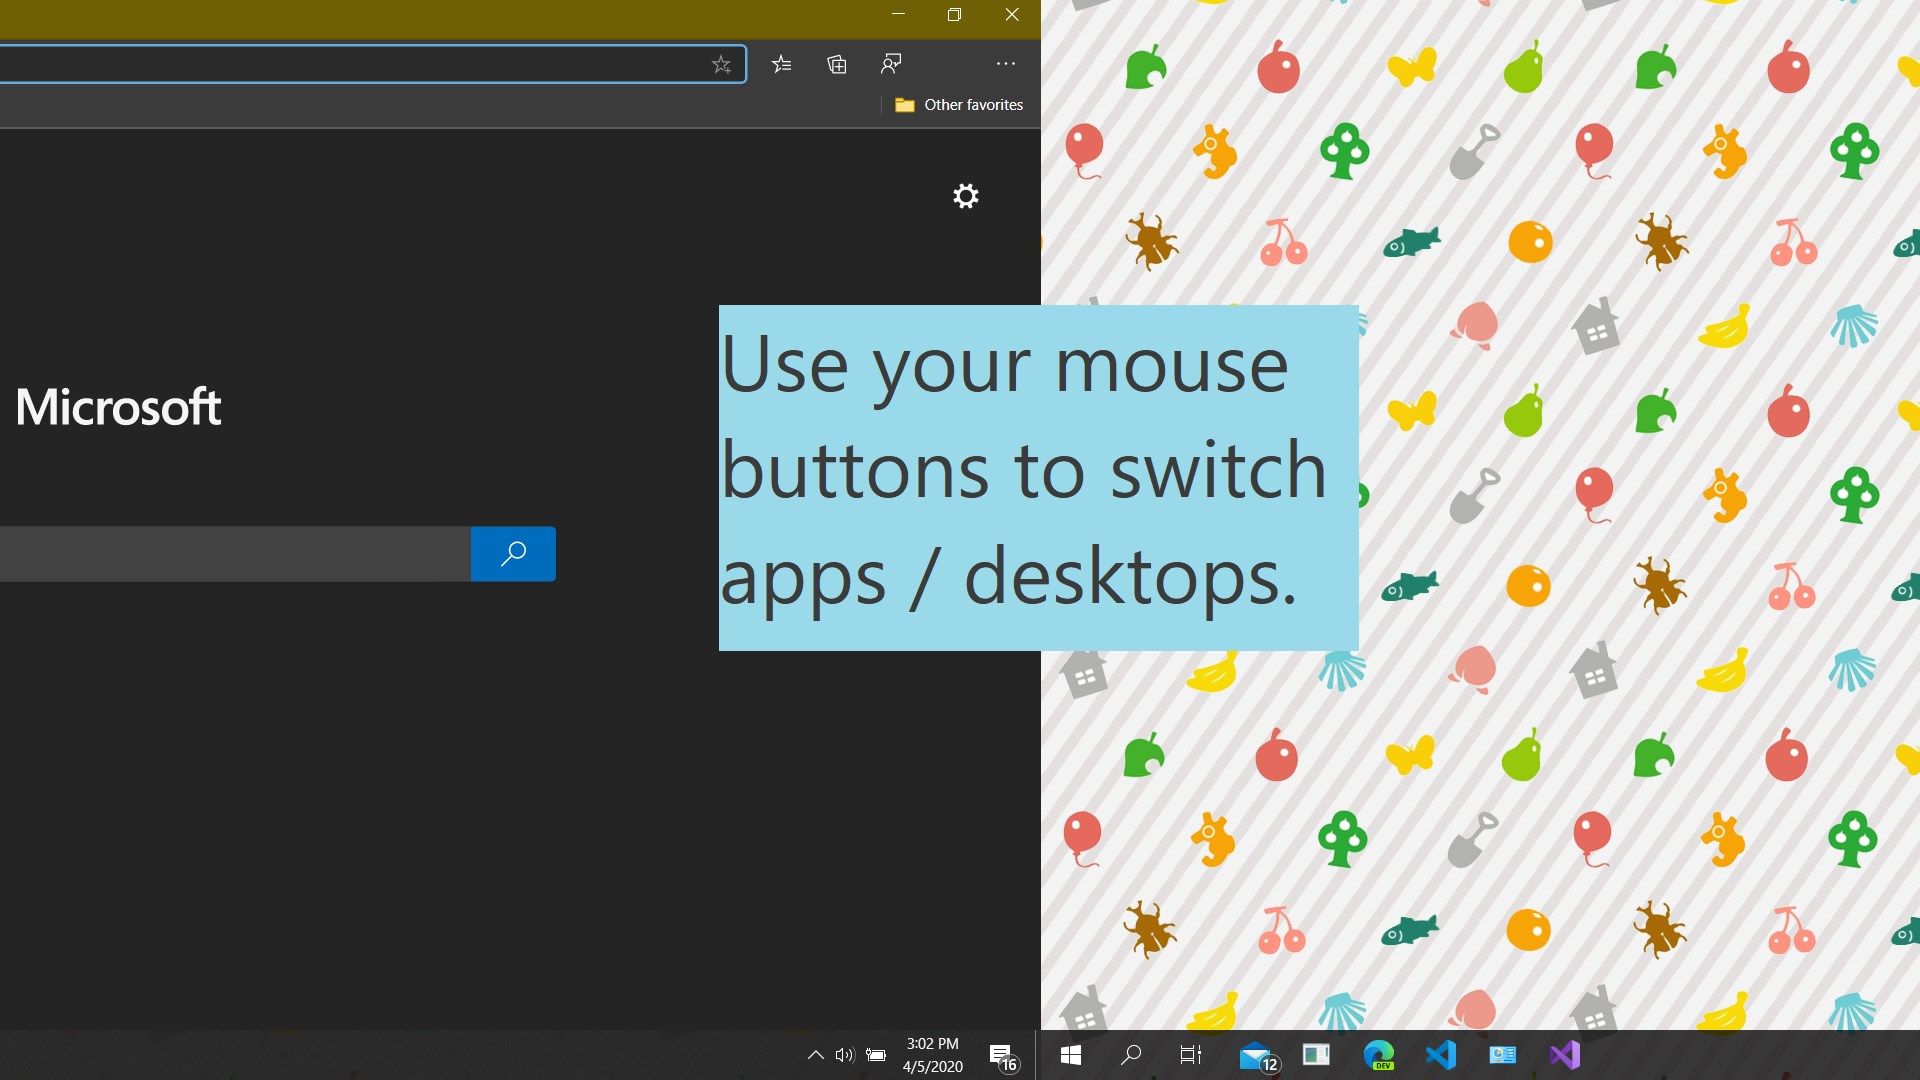 How to use: Plug in a mouse with forward and back buttons. Open more desktops with Task View in Windows. Drag your open apps to the new desktops. Then use the mouse buttons to switch to your other apps!